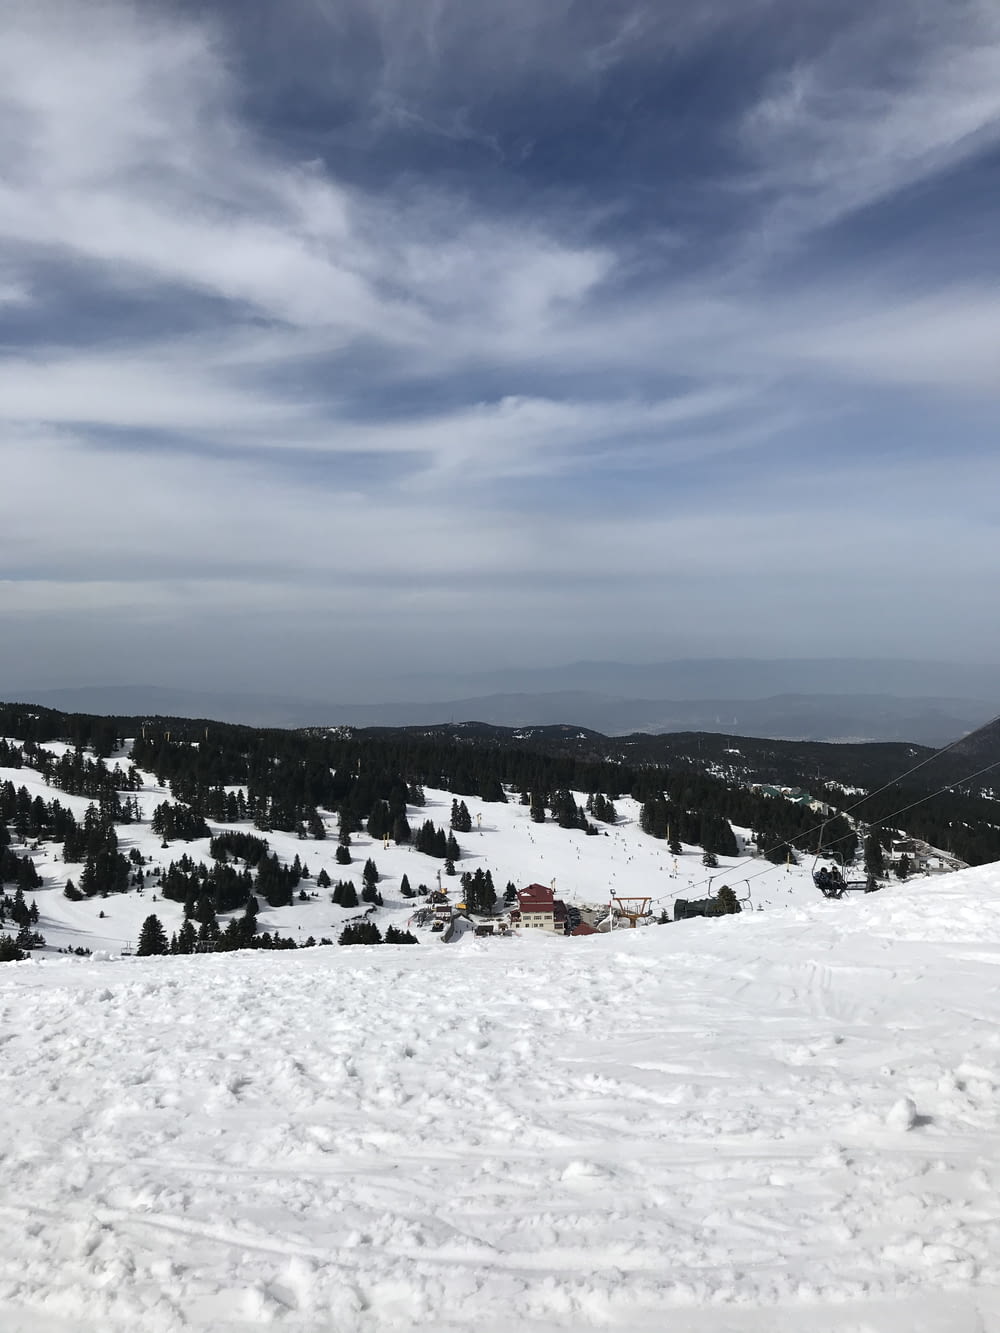 people on snow covered mountain under cloudy sky during daytime